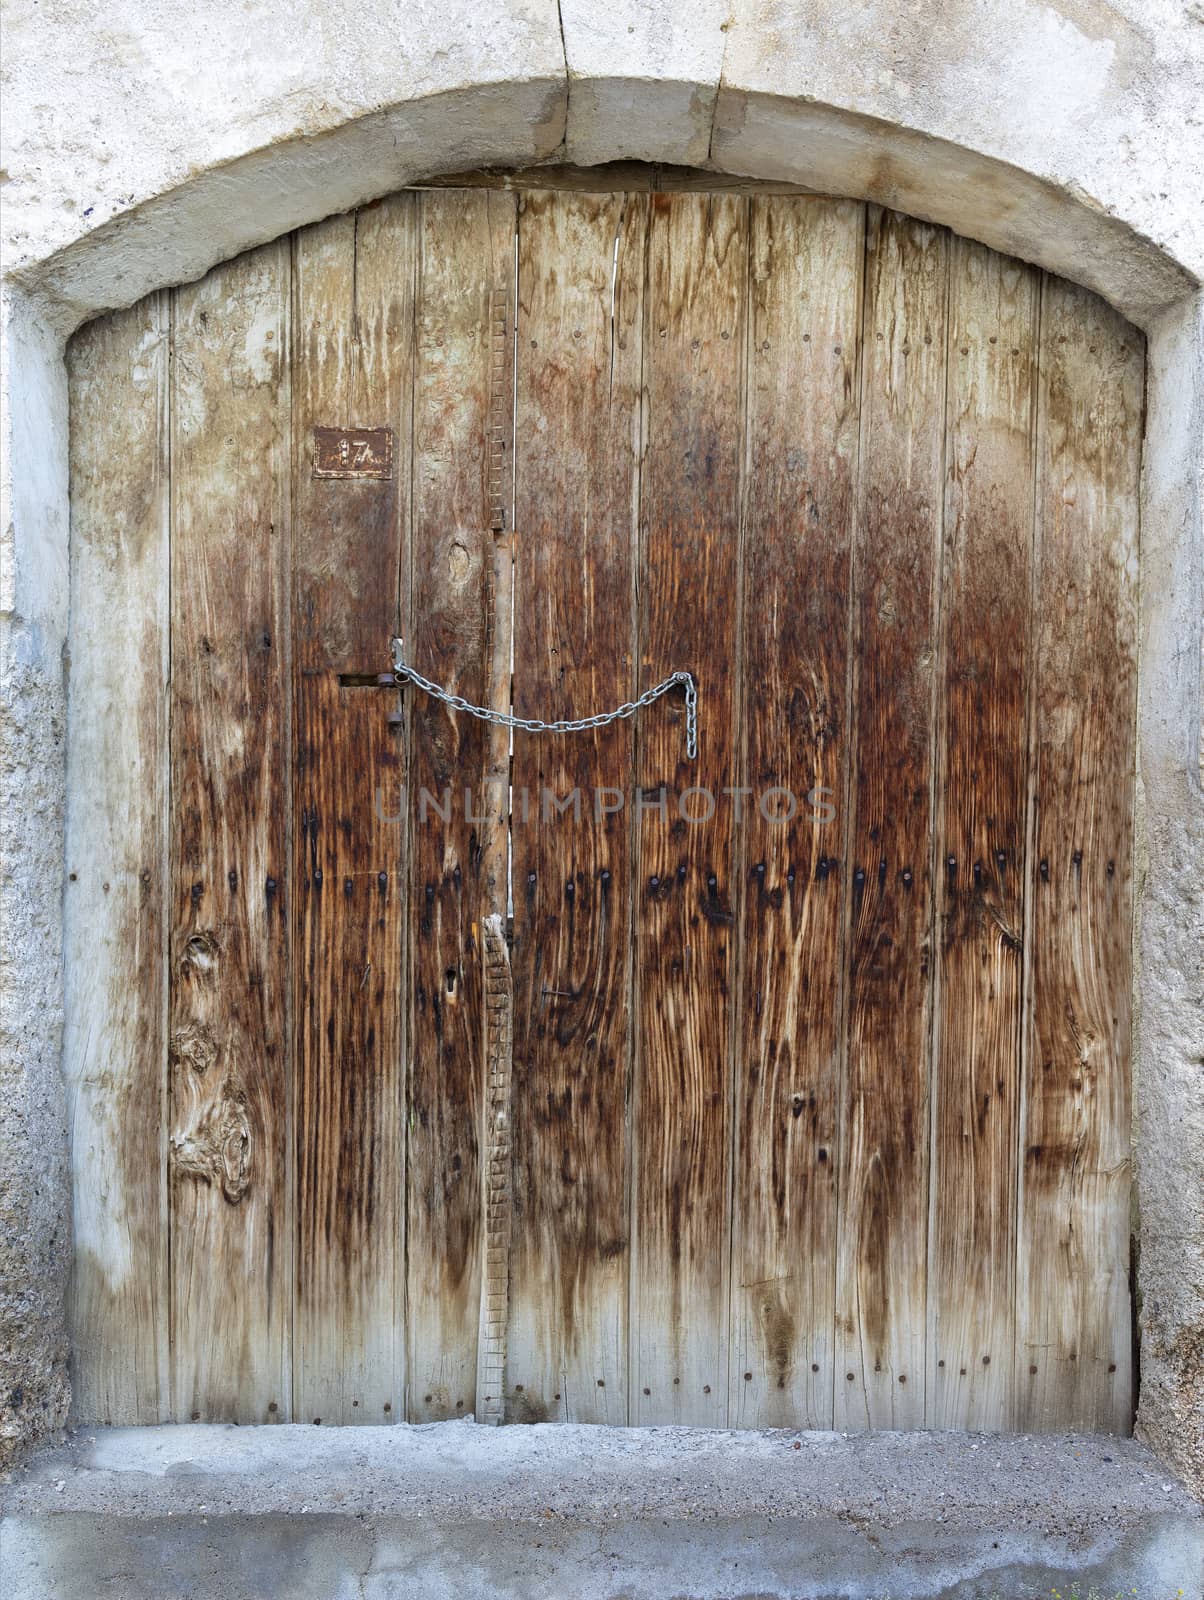 Very old weathered trapezoidal antique wooden doors with a metal wrought iron lock and chain